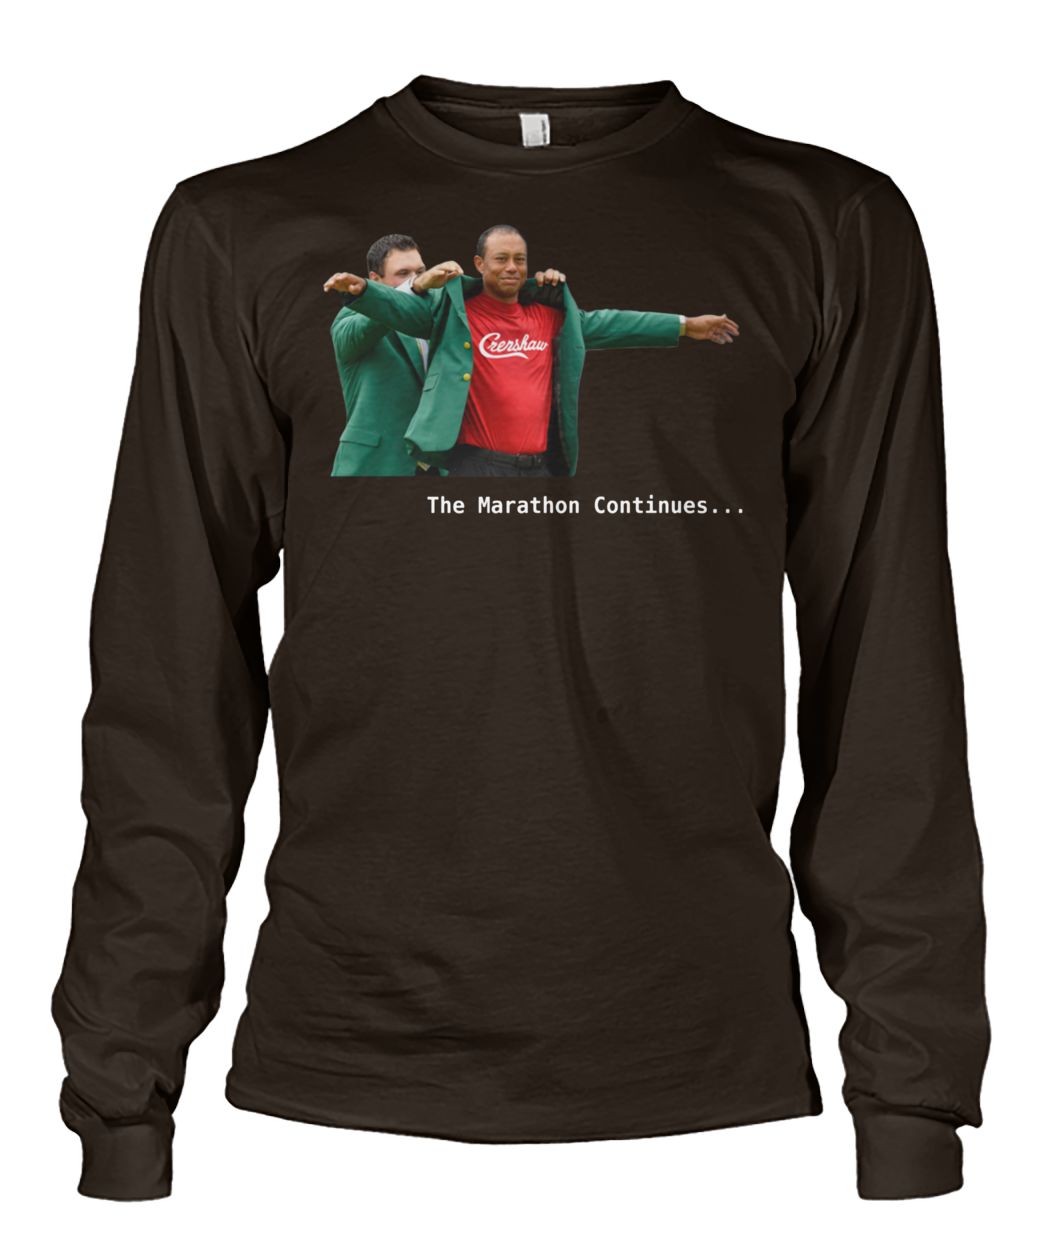 Tiger woods crenshaw the marathon continues unisex long sleeve